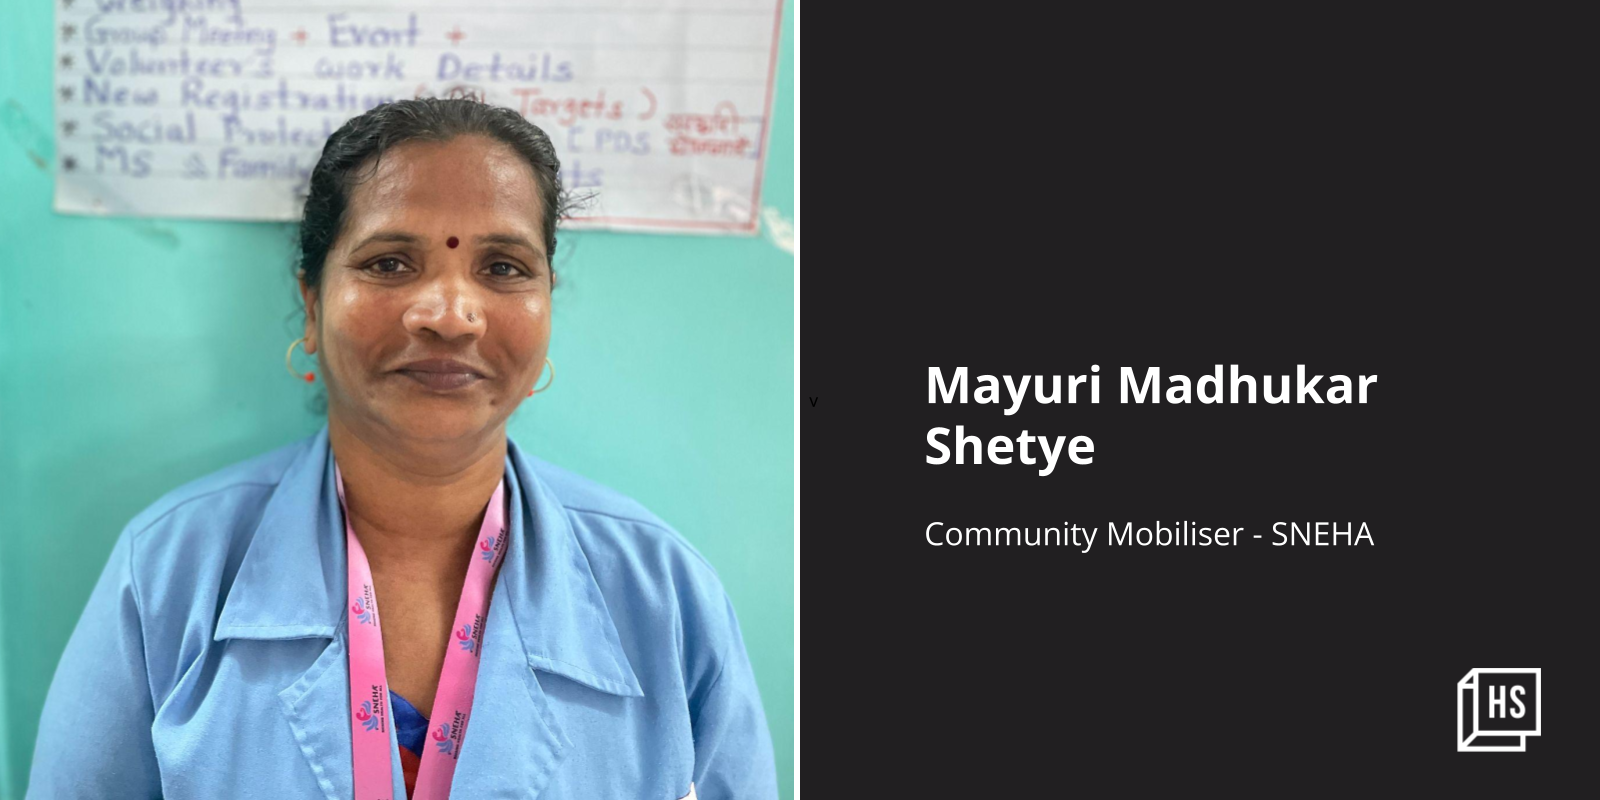 This community mobiliser is working to improve the health of women and children in a Dharavi colony